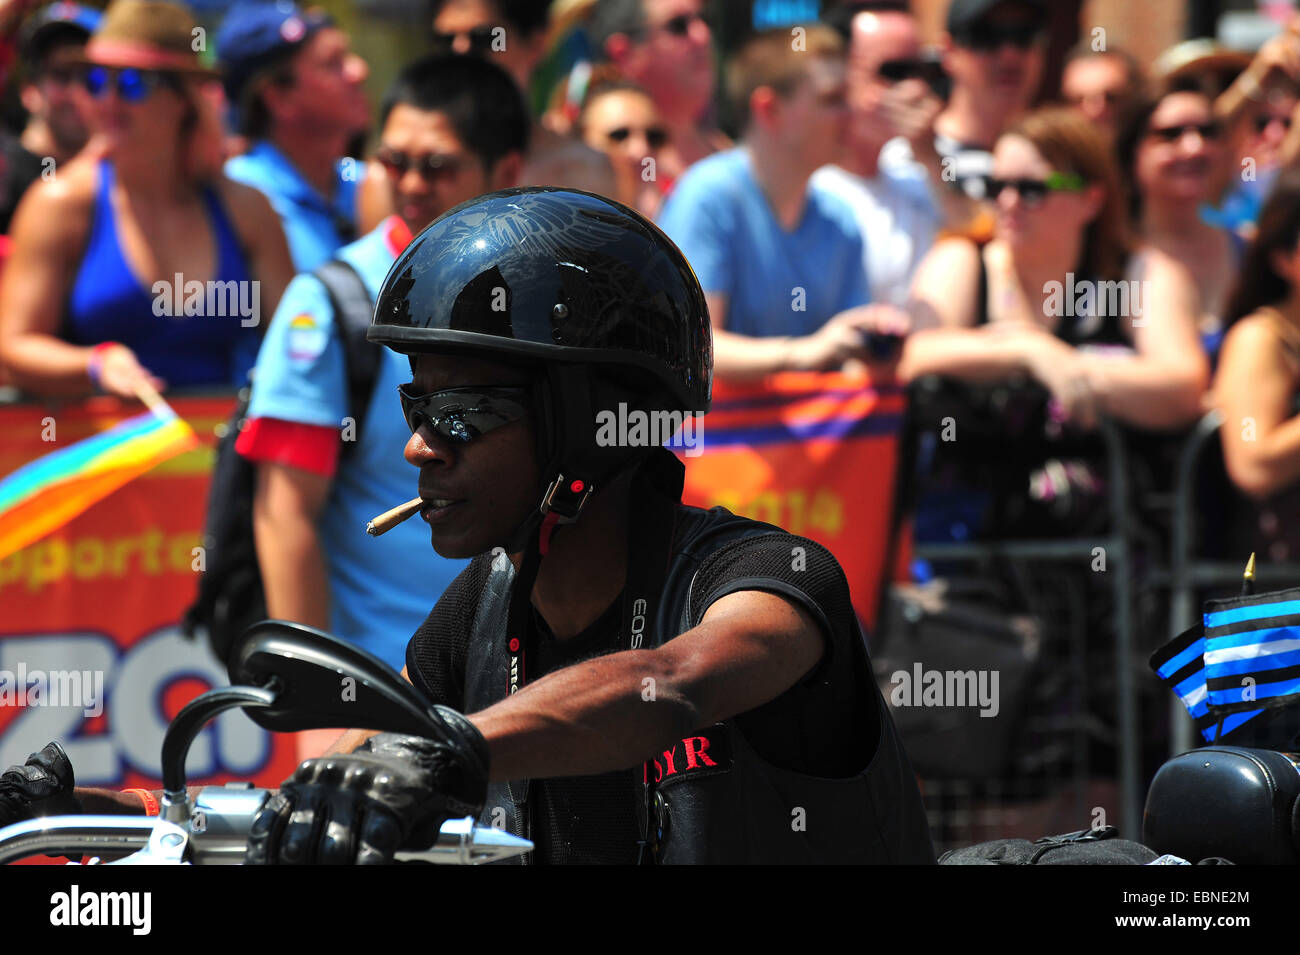 A woman rides a motorbike while smoking a cigar at the 2014 World Pride in Toronto. Stock Photo